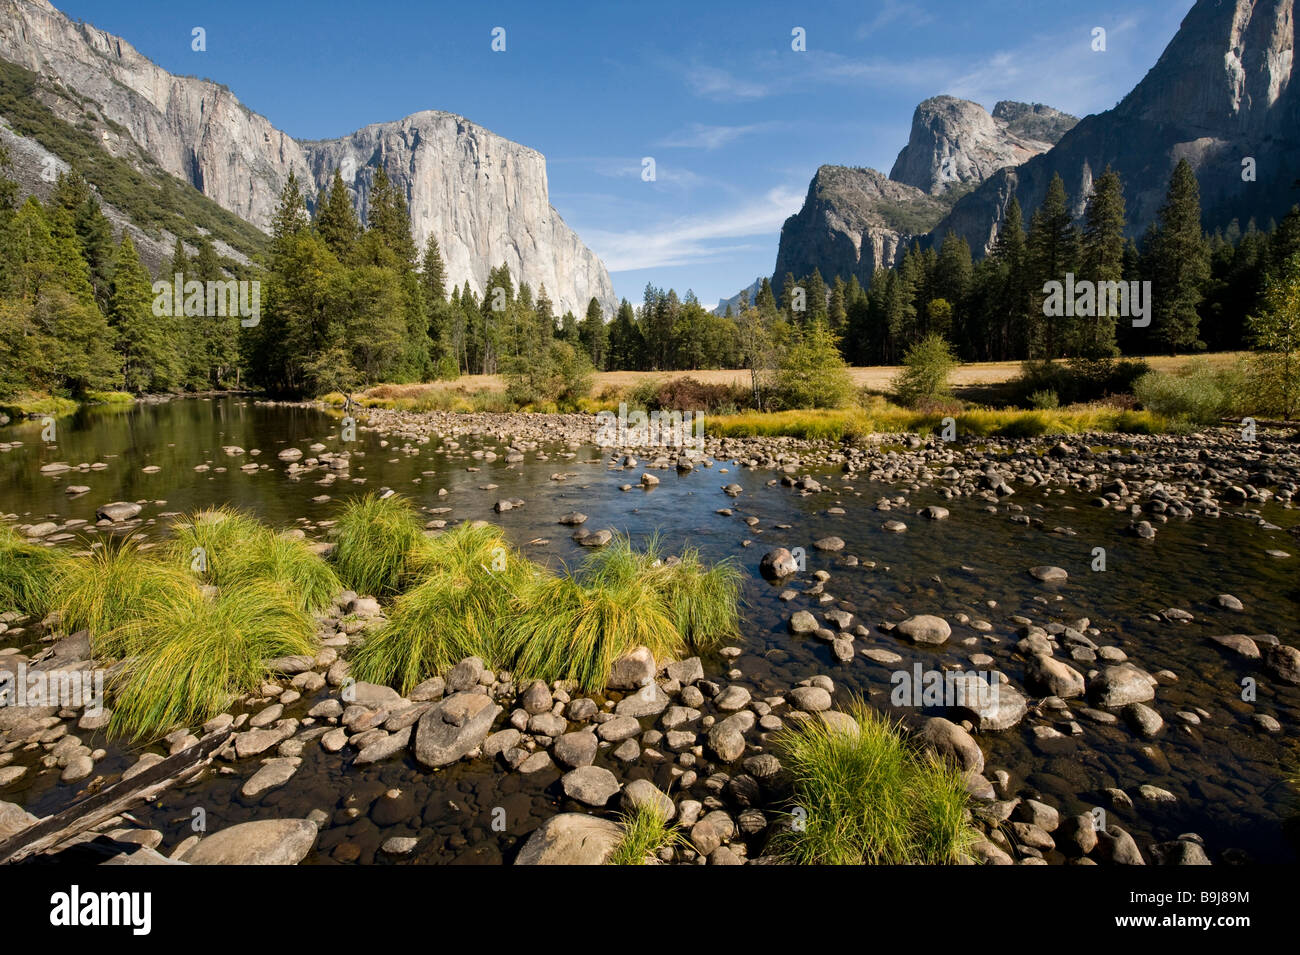 Merced River And Yosemite Valley Seen From Gates Of The Valley